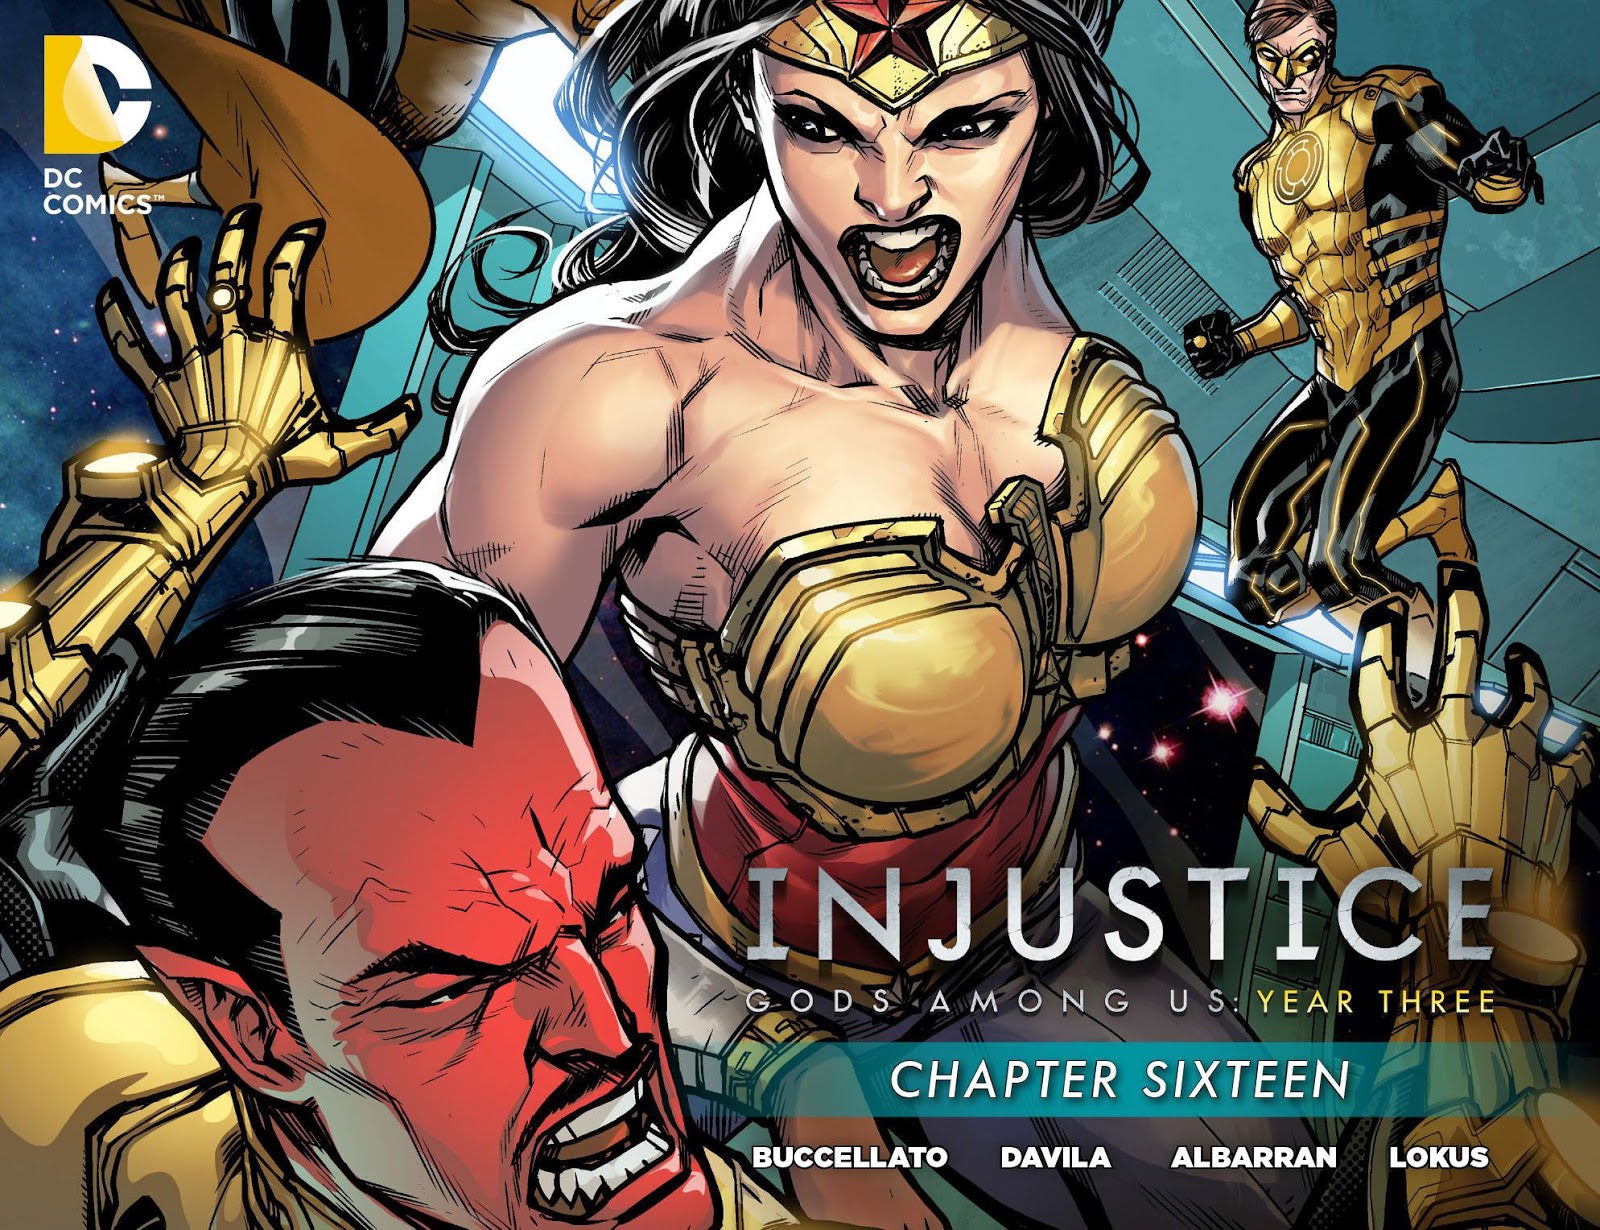 What's New 1/21: WONDER WOMAN: BLOODLINES, THE BATMAN WHO LAUGHS #2 & More!  - New Comic Releases - DC Community